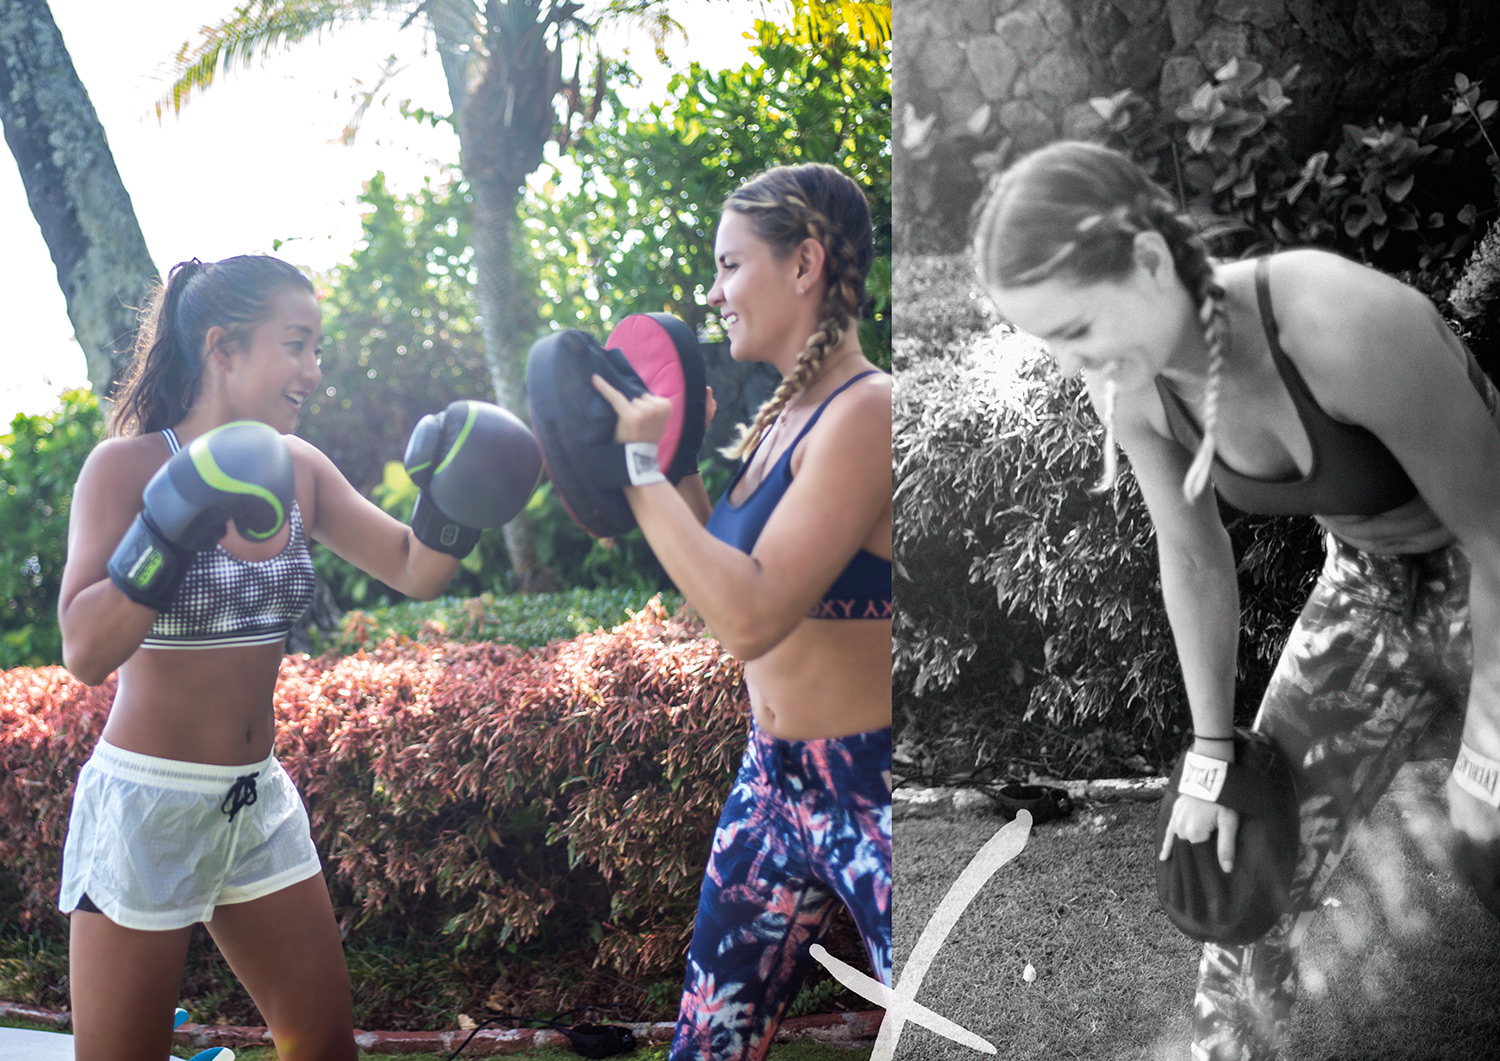 Packing a punch - Boxing with Kelia and Bruna